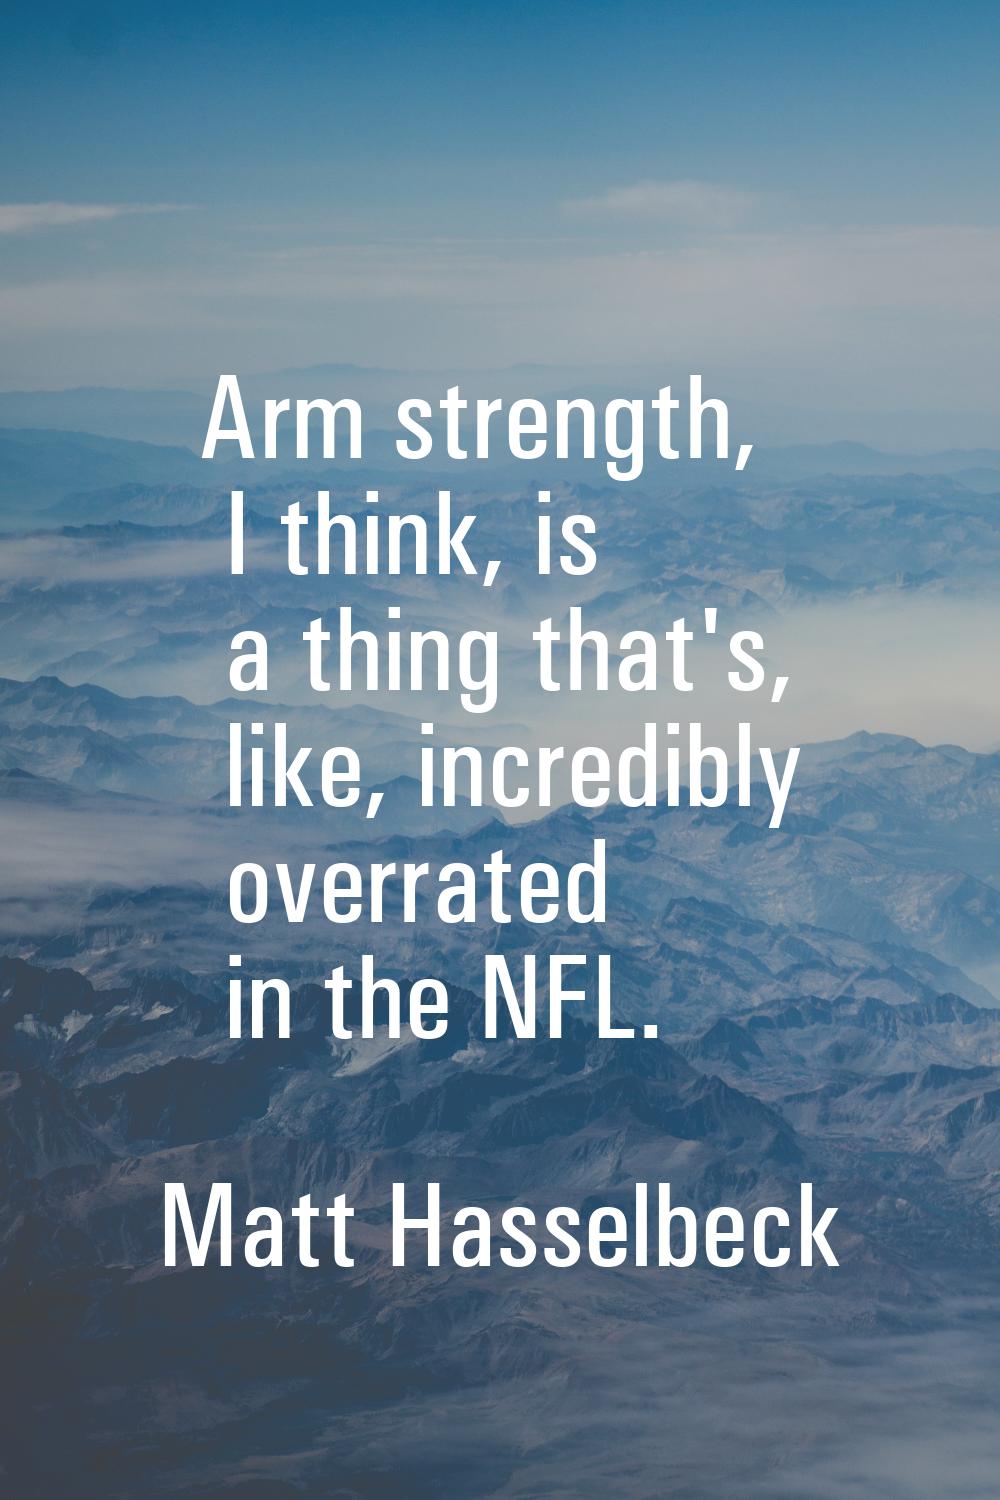 Arm strength, I think, is a thing that's, like, incredibly overrated in the NFL.